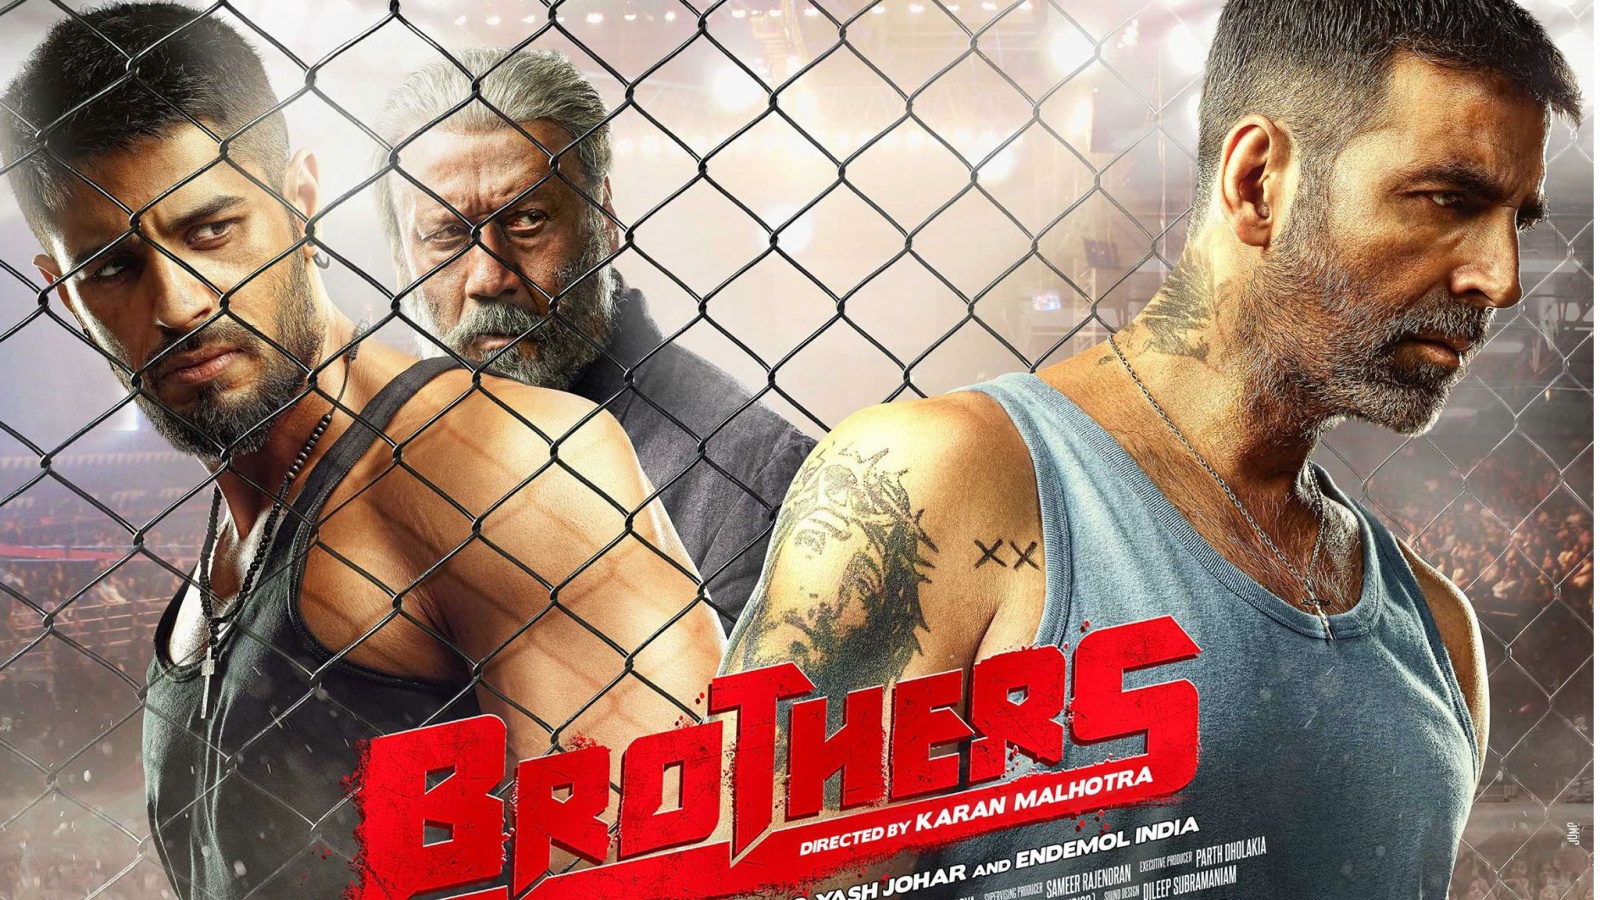 Brothers 2015